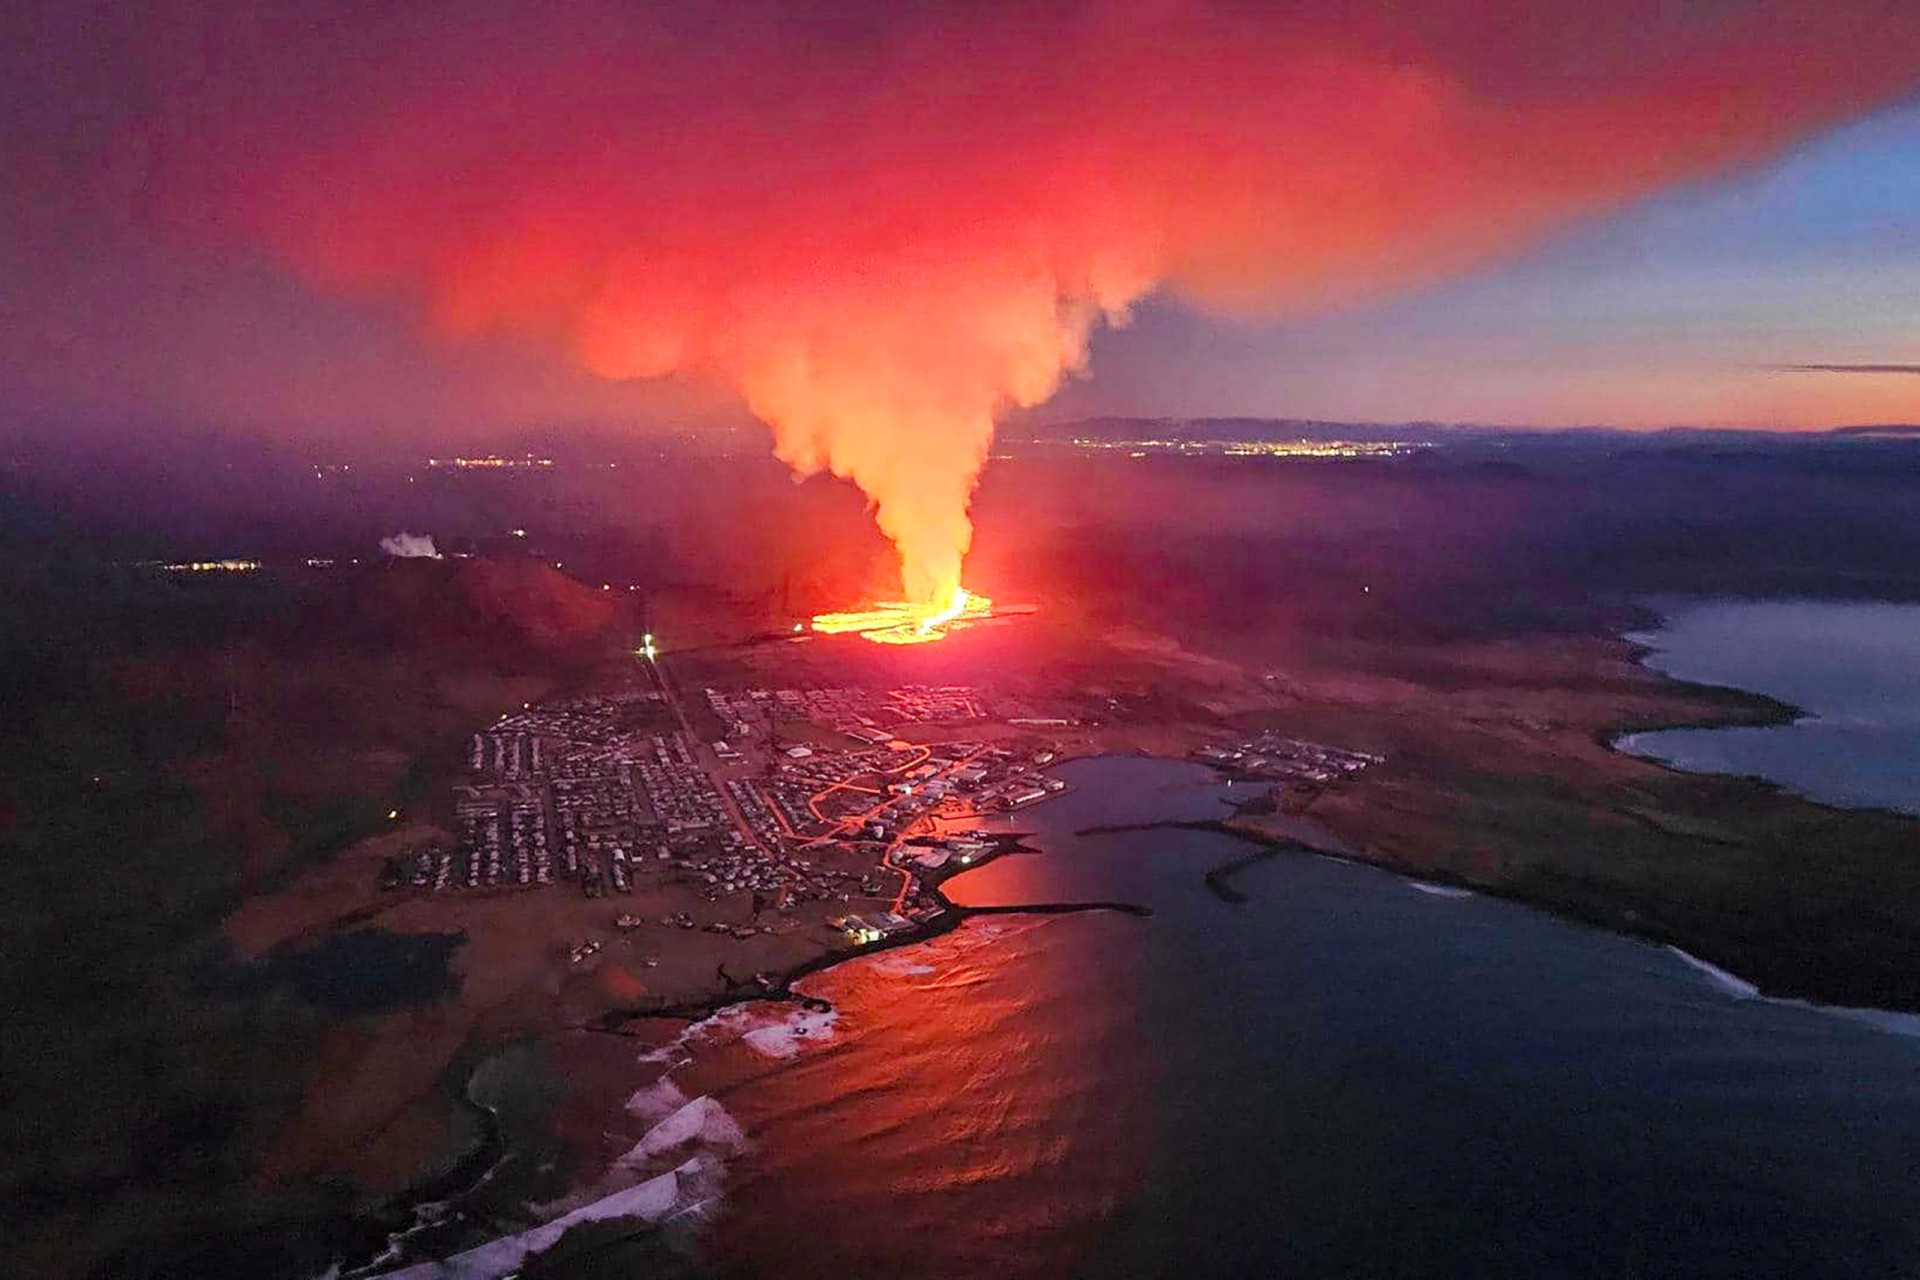 <p>The town of Grindavik in the Southern Peninsula district of Iceland is still under threat from a volcanic eruption that began in December 2023. Advancing magma spewing out of the Sundhnúkur crater prompted the evacuation of Grindavik residents, and the town is currently abandoned.</p><p><a href="https://www.msn.com/en-us/community/channel/vid-7xx8mnucu55yw63we9va2gwr7uihbxwc68fxqp25x6tg4ftibpra?cvid=94631541bc0f4f89bfd59158d696ad7e">Follow us and access great exclusive content every day</a></p>